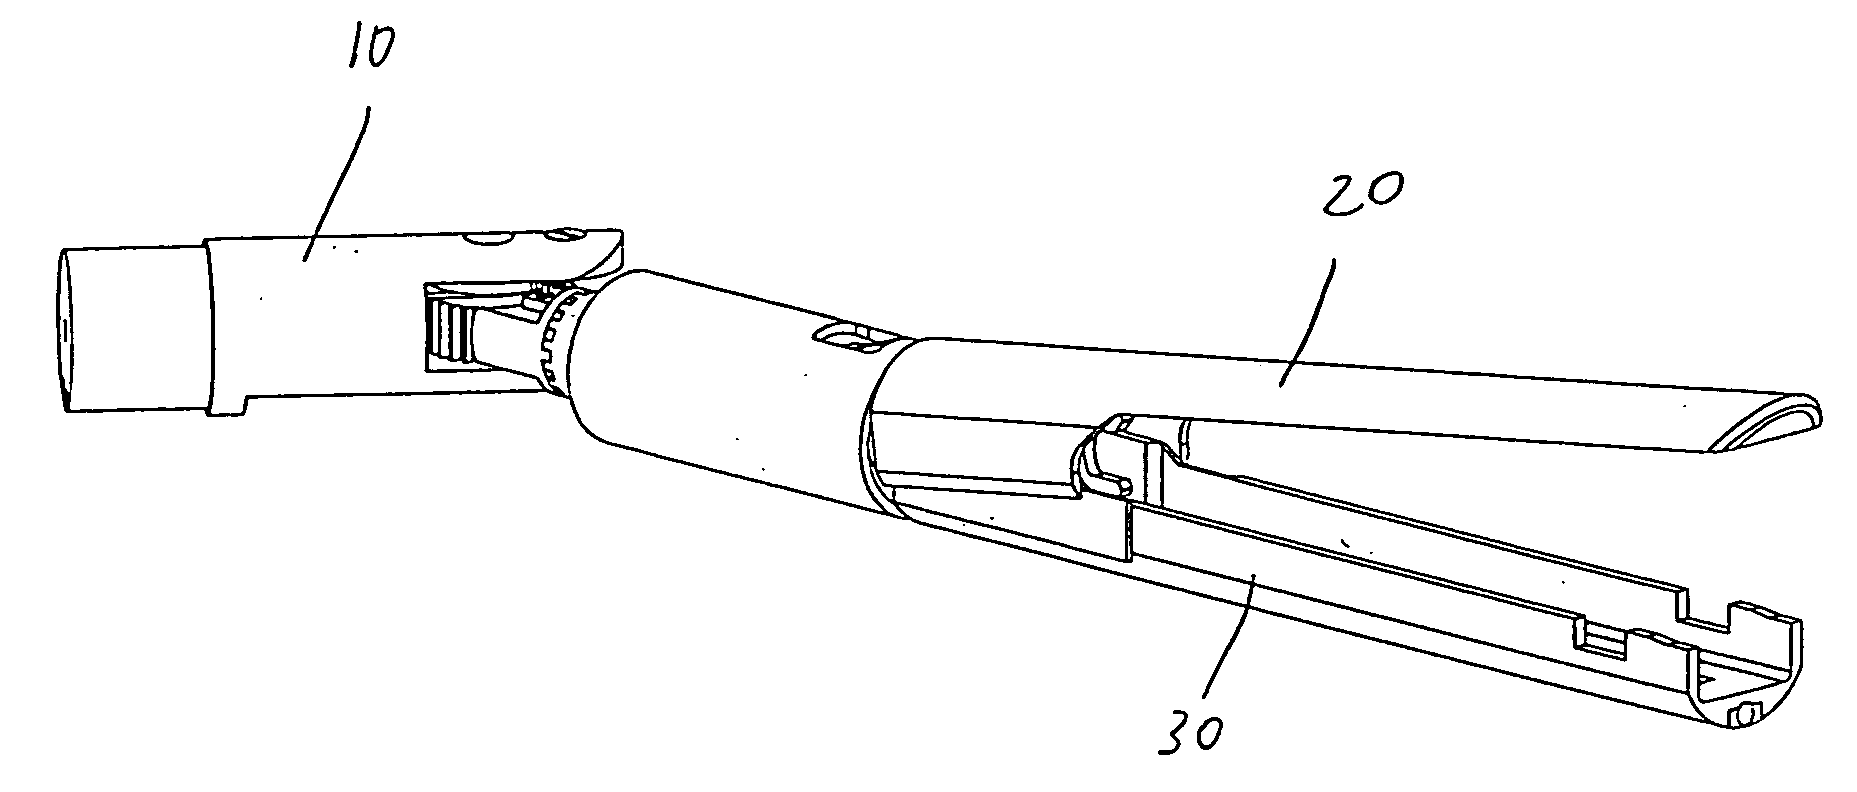 Method for operating a surgical stapling and cutting device